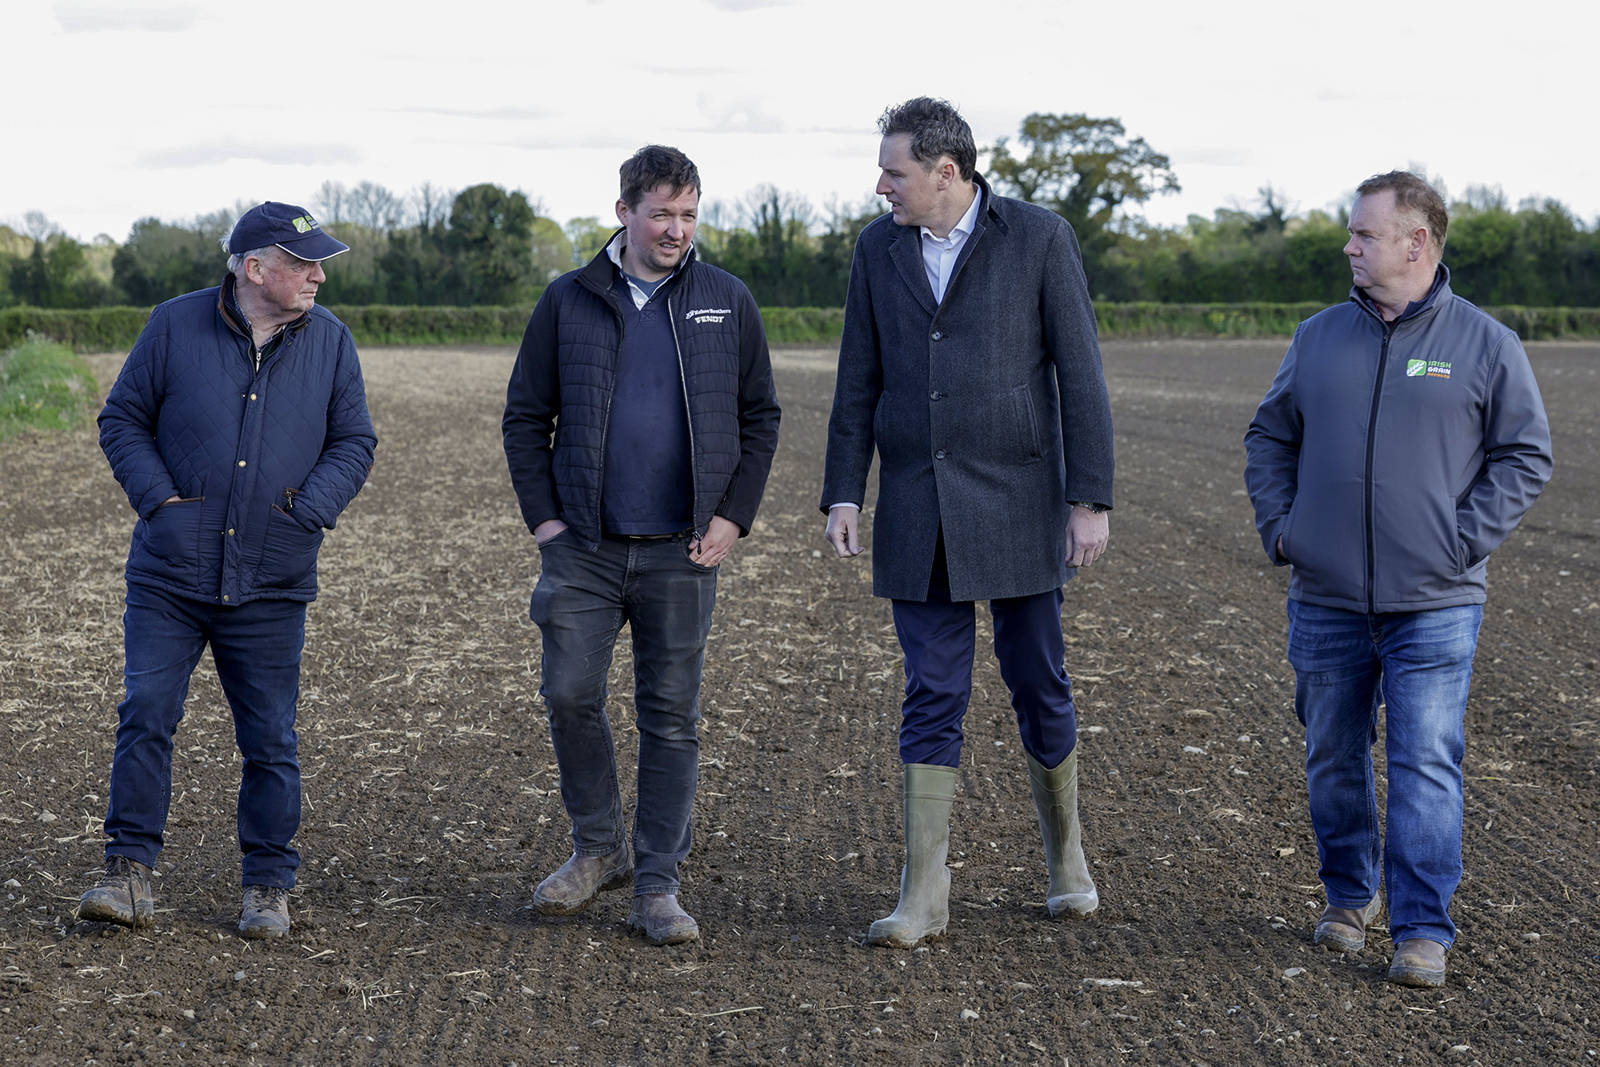 Minister McConalogue meets with tillage farmers